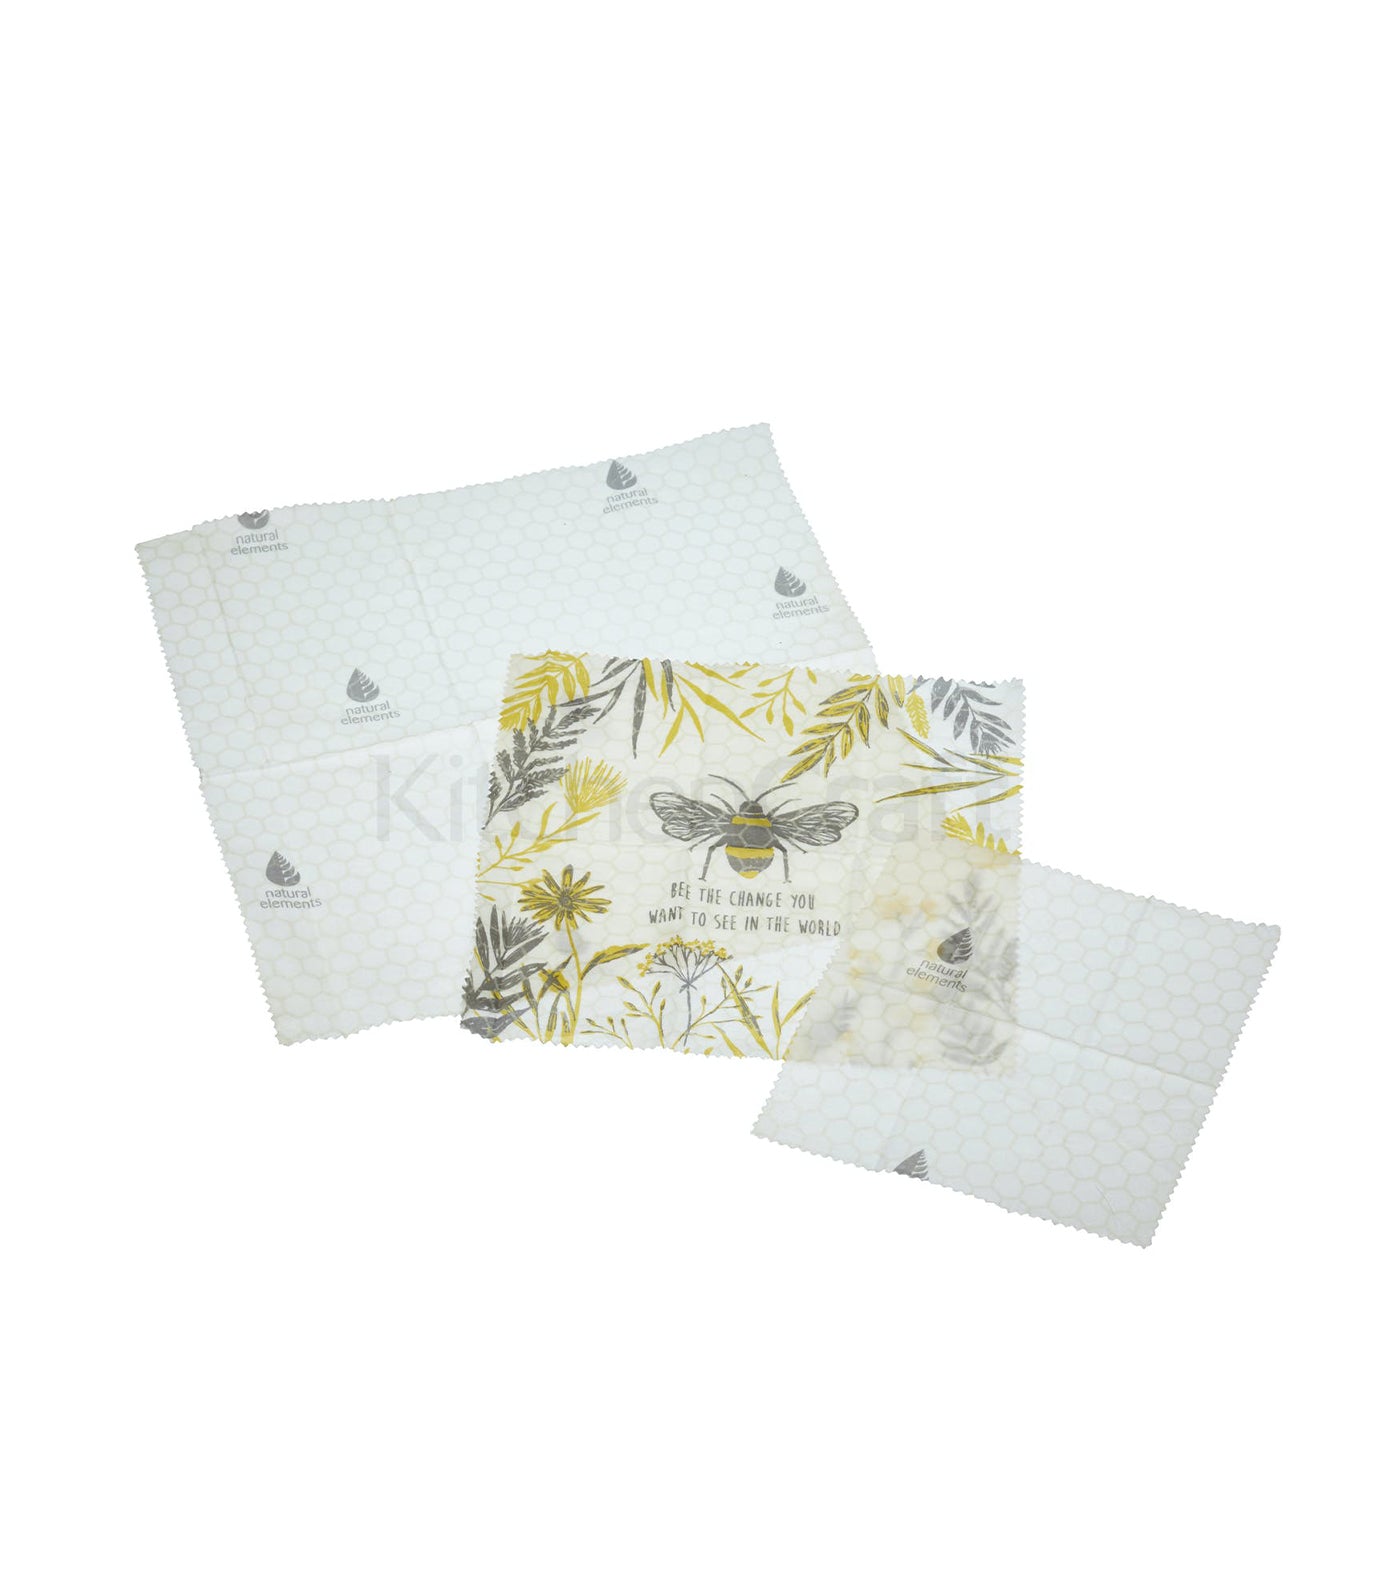 Natural Elements Eco-Friendly Set of Three Beeswax Food Wraps